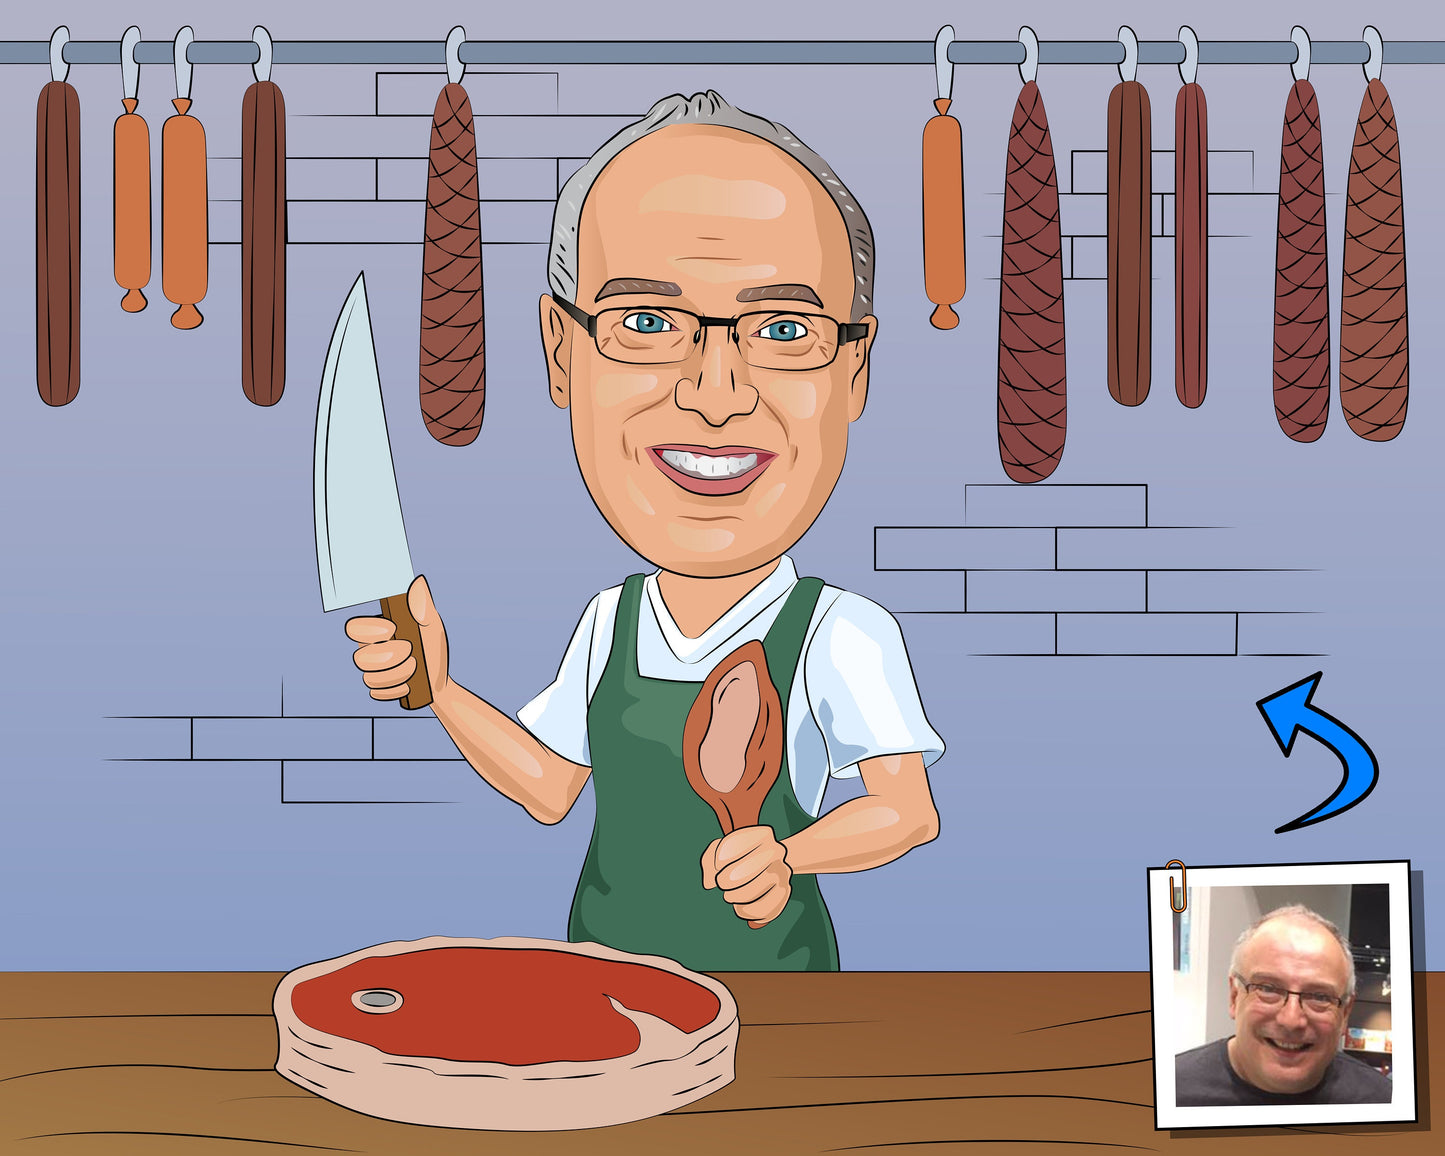 Butcher Gift - Custom Caricature Portrait From Your Photo